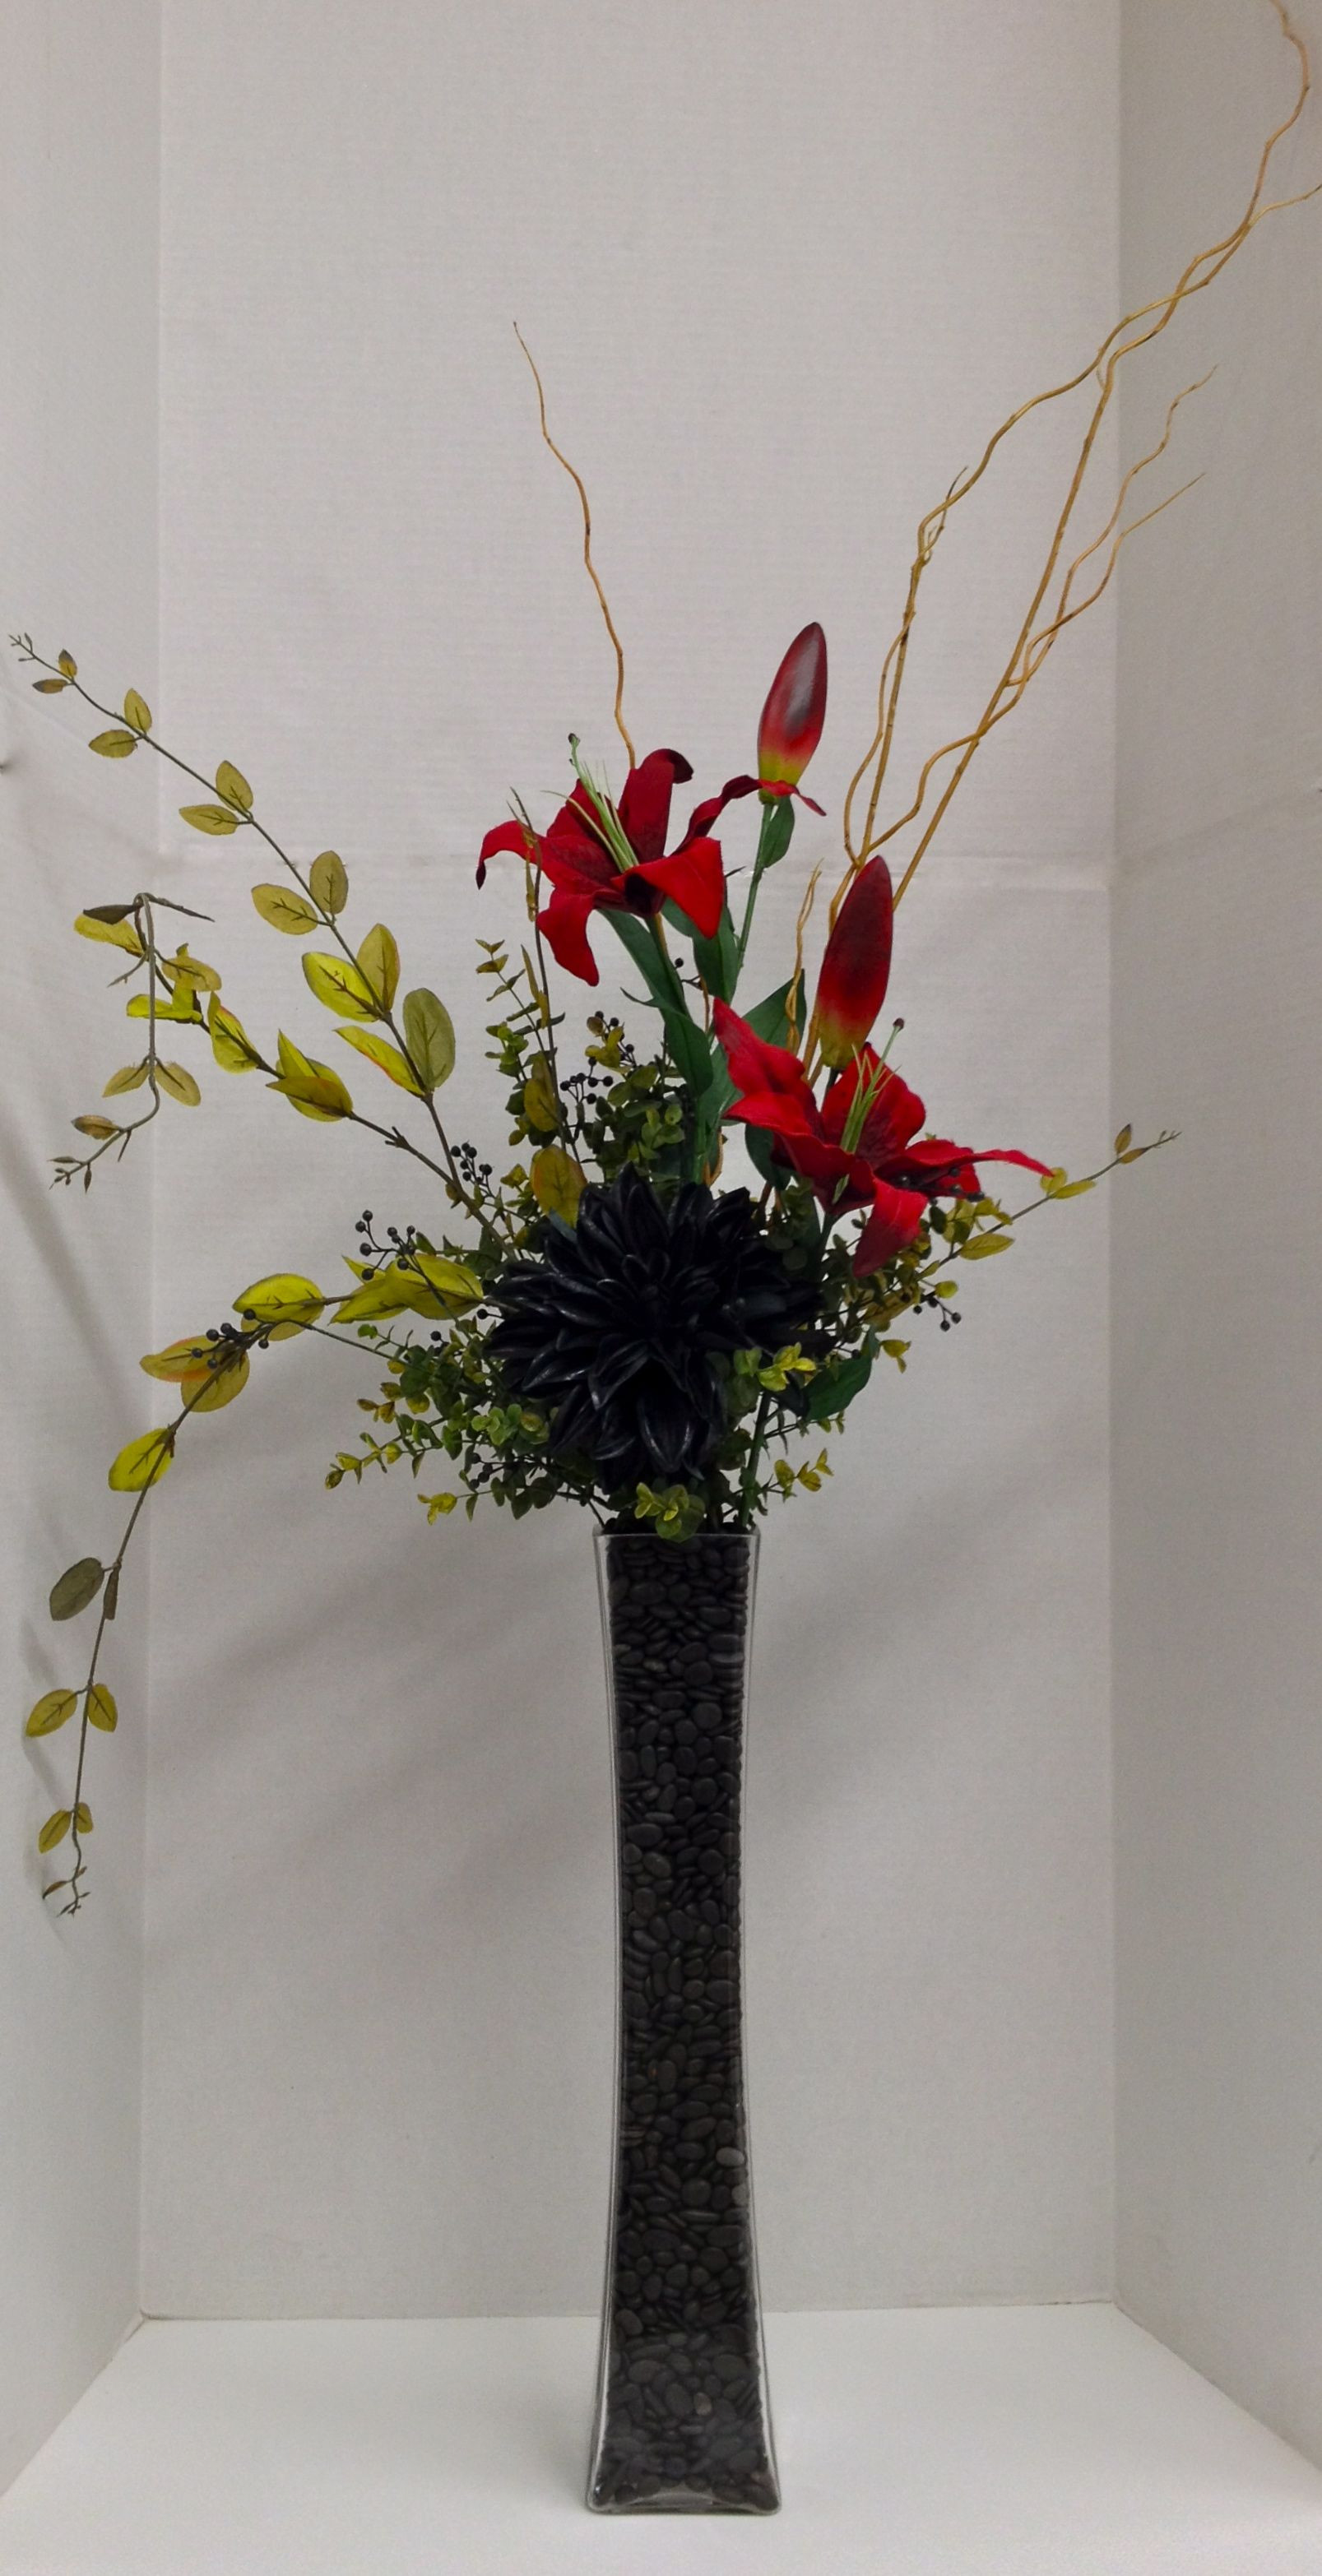 24 Stunning Green Bamboo Sticks for Vases 2024 free download green bamboo sticks for vases of full of high drama arrangement black dahlia and red lilies with within full of high drama arrangement black dahlia and red lilies with willow branch and gree